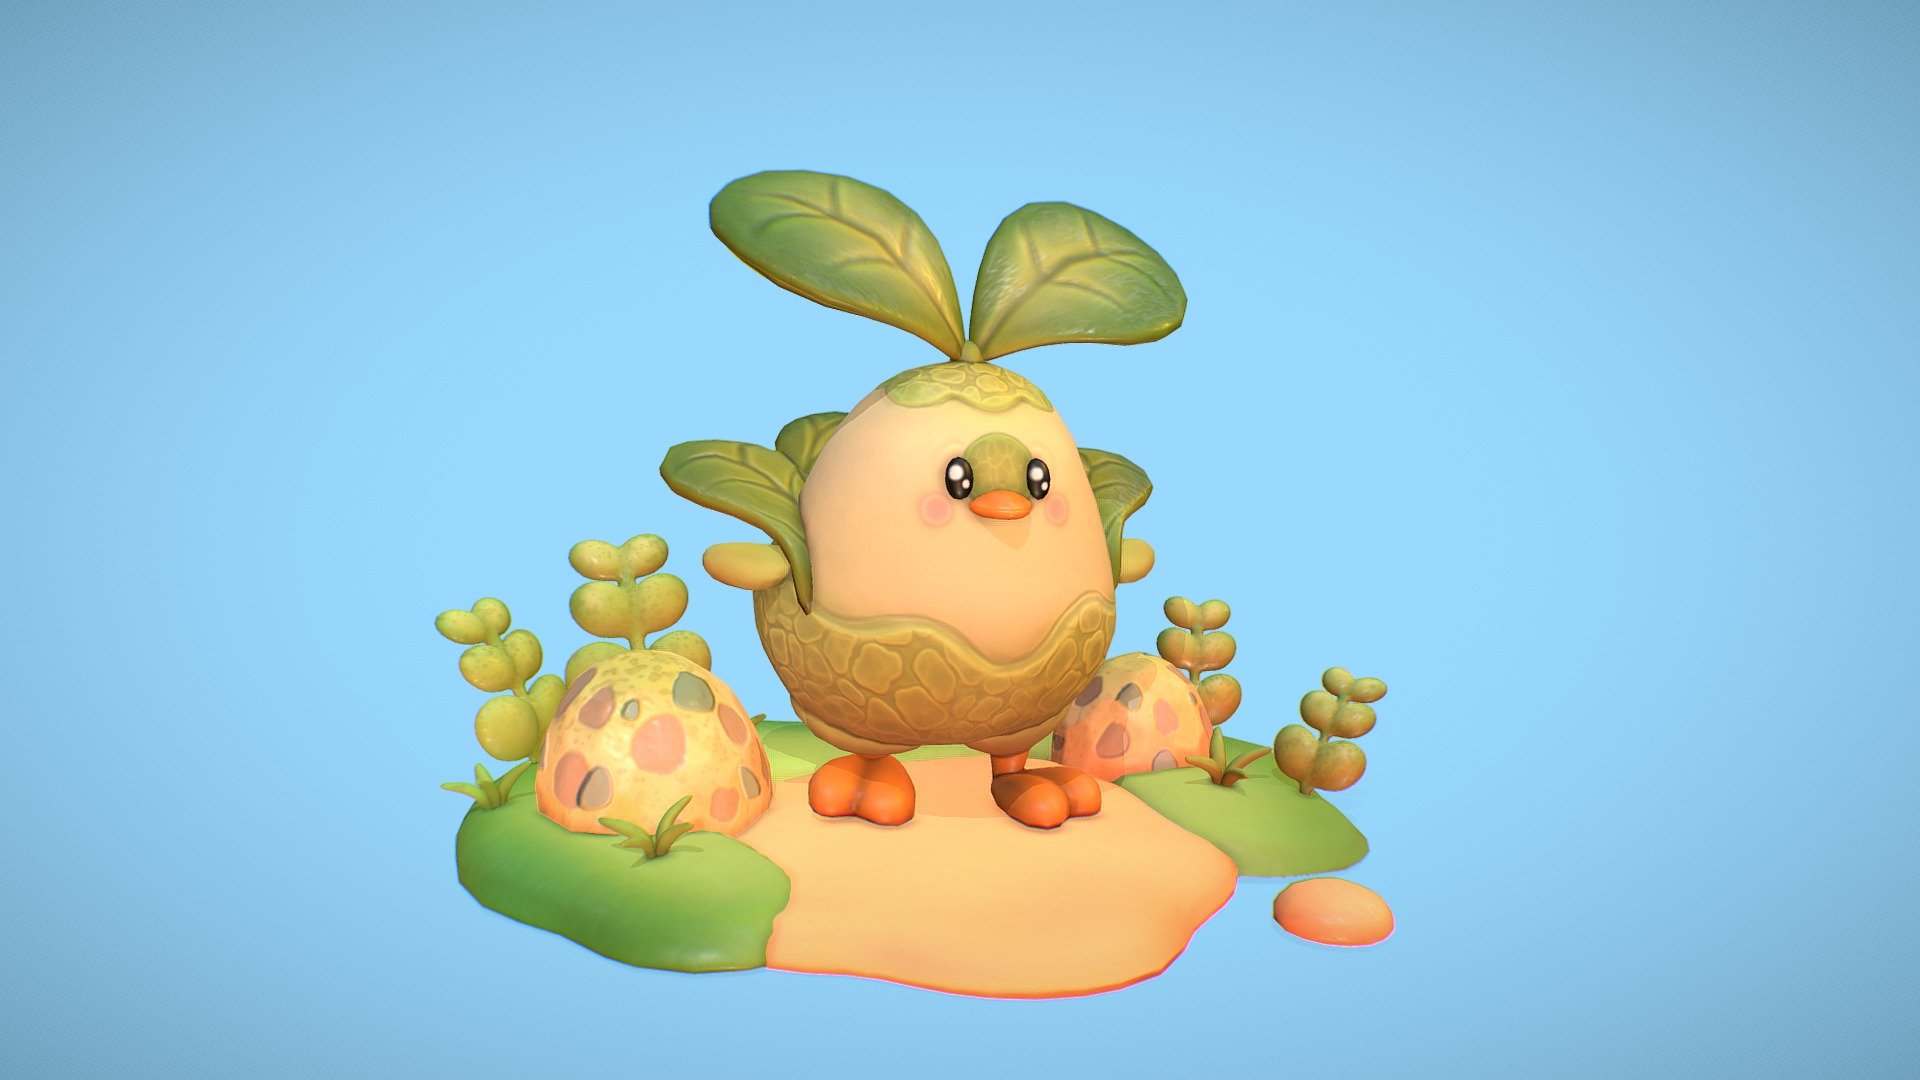 concept by onemegawatt 
designs from #EliosBotanimals project.
hope you like it guys!! - Cute BUK-CHOY "Happy easter holiday" - 3D model by aymane allouch (@aymaneallouch) 3d model